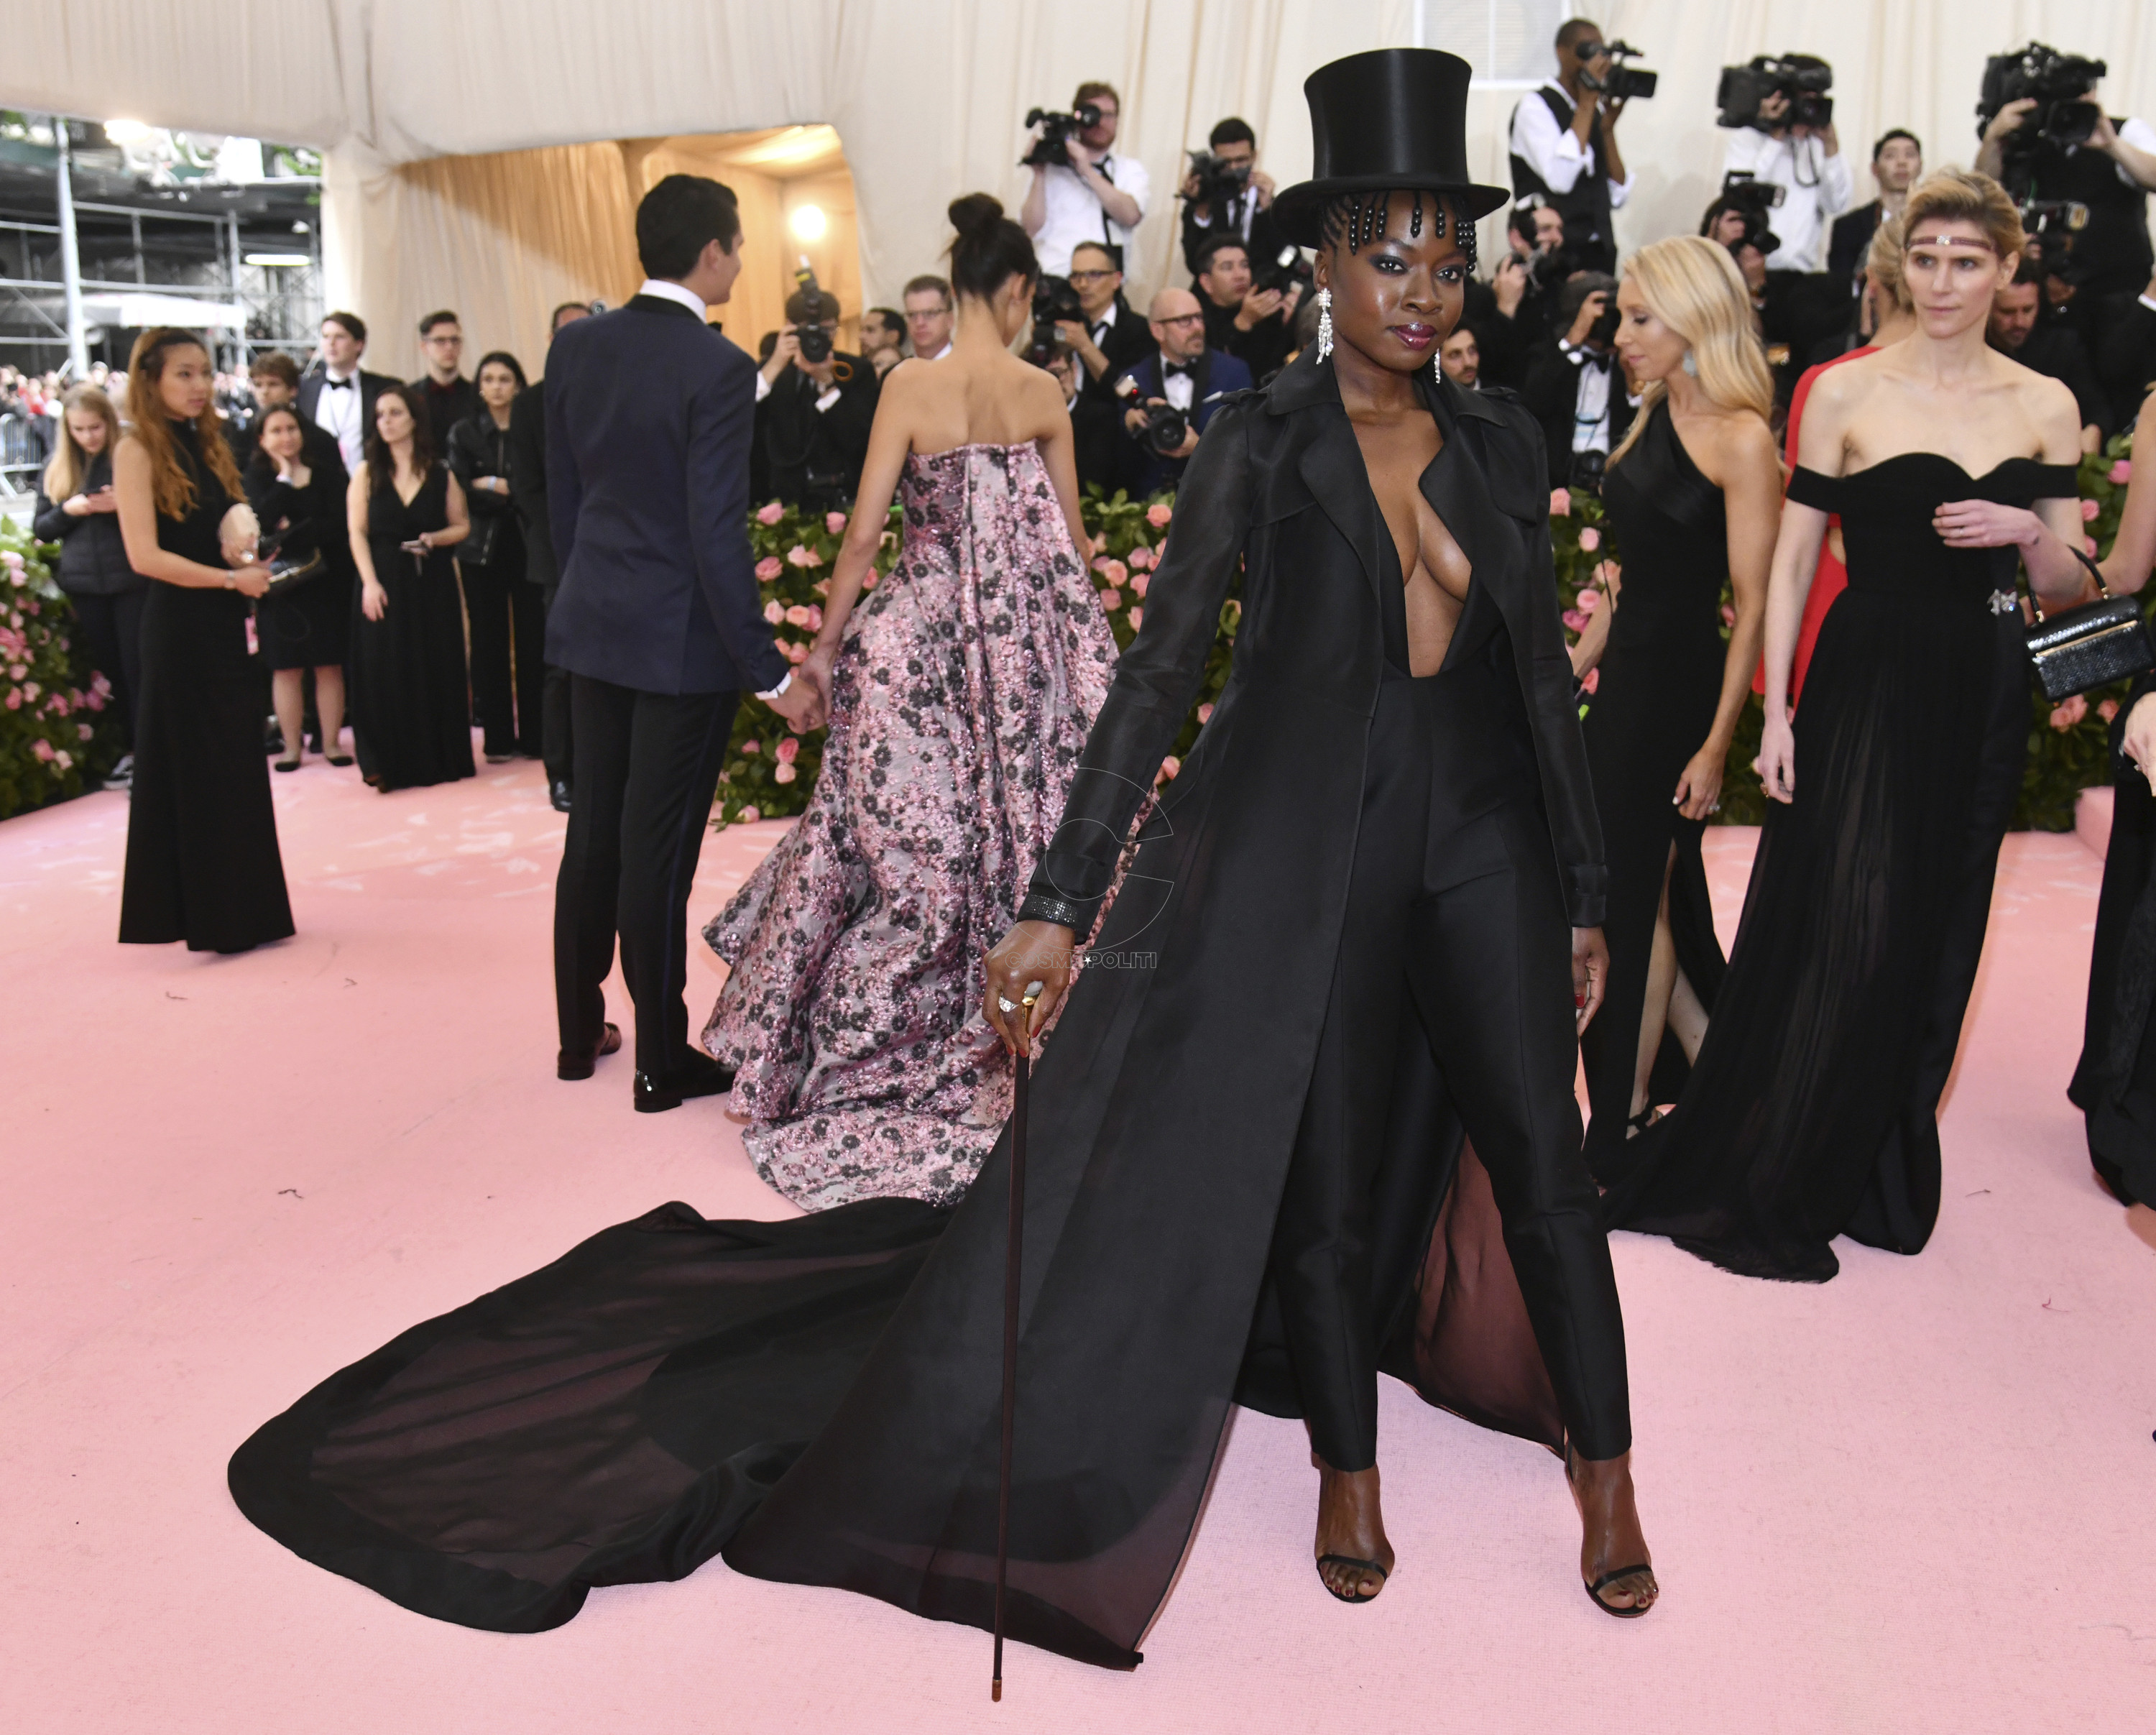 Danai Gurira attends The Metropolitan Museum of Art's Costume Institute benefit gala celebrating the opening of the "Camp: Notes on Fashion" exhibition on Monday, May 6, 2019, in New York. (Photo by Charles Sykes/Invision/AP)